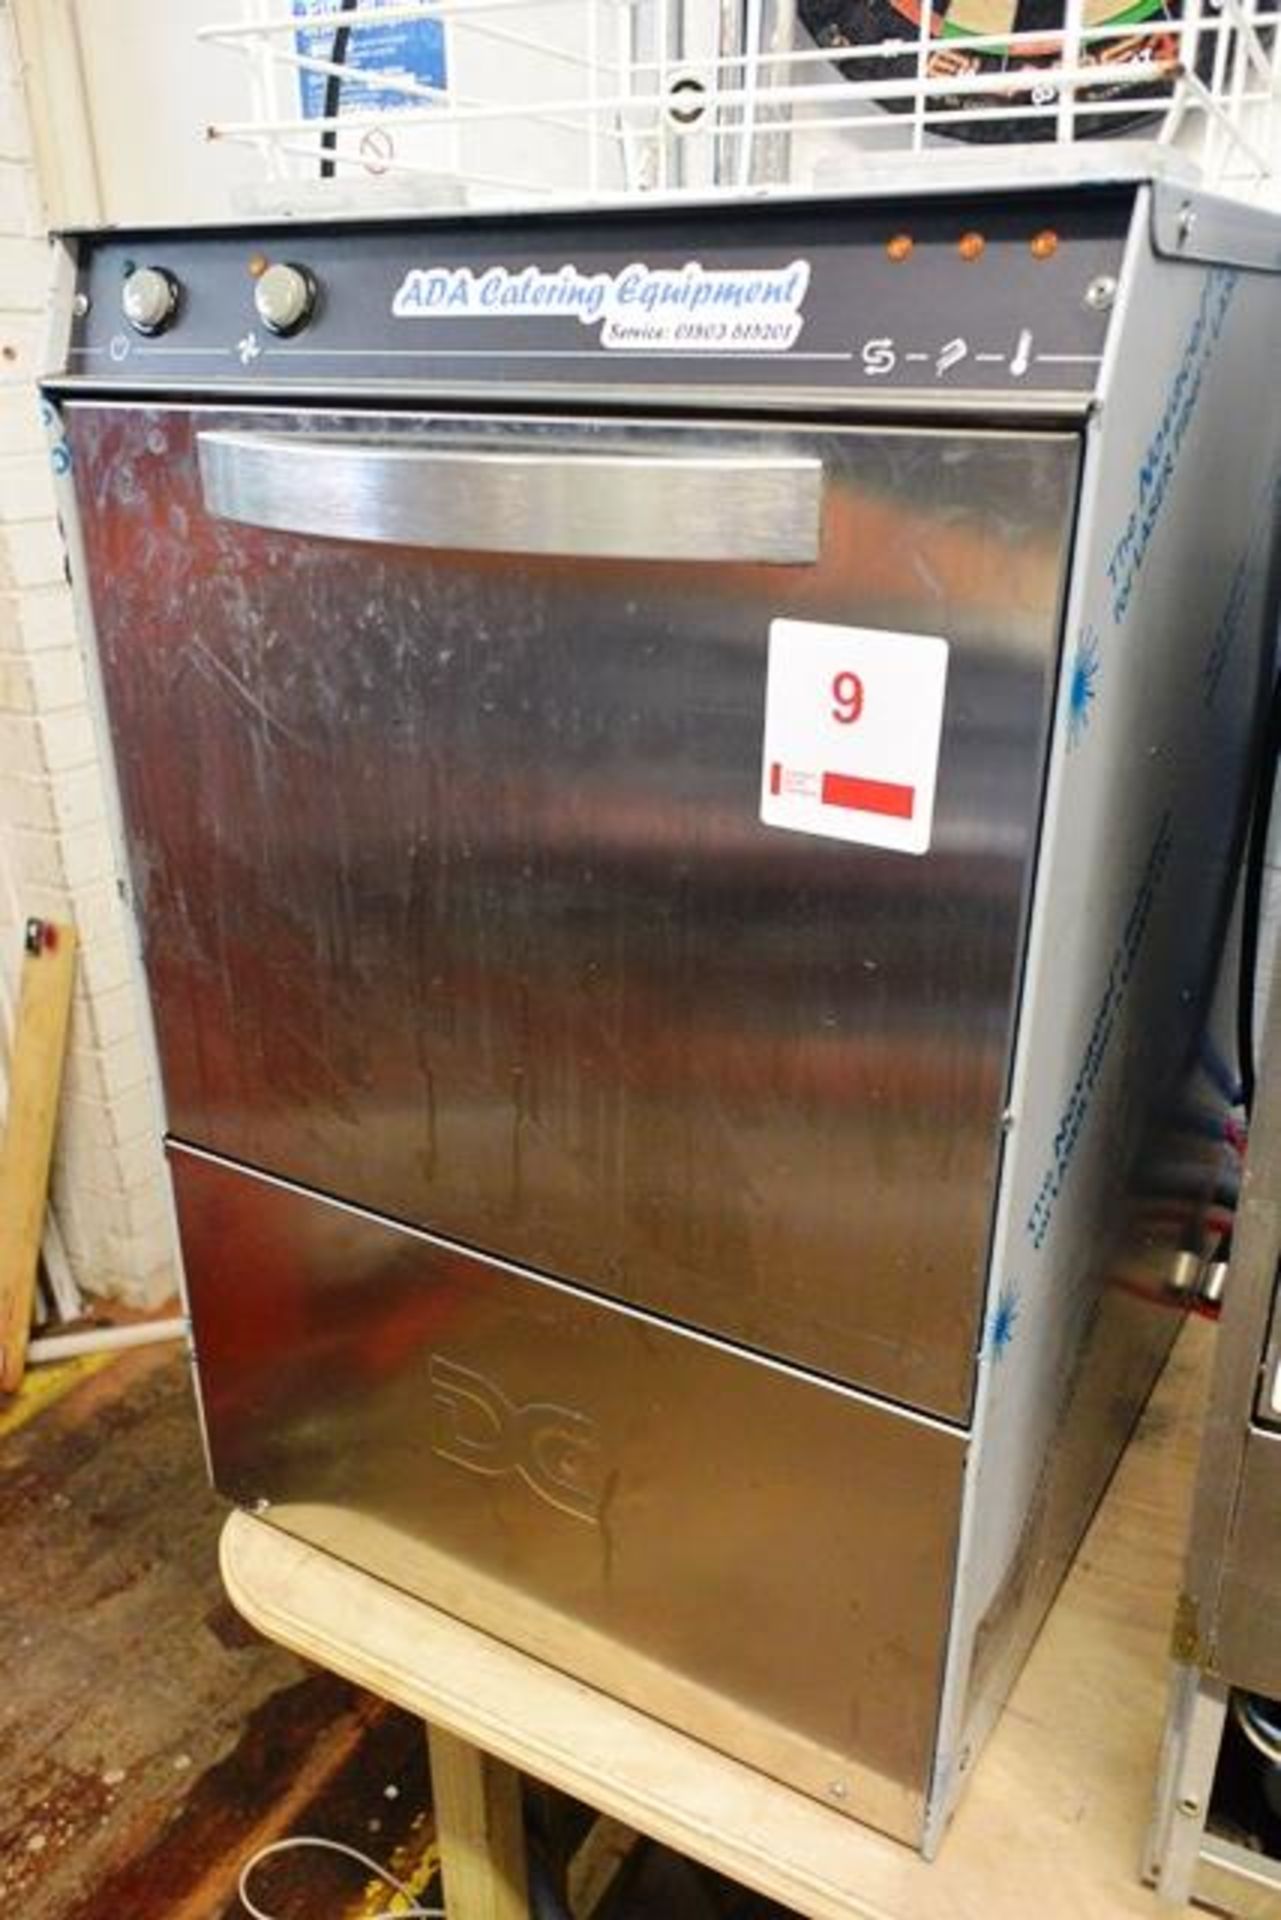 DC SG40HISD brewery stainless steel glass washer, serial no. 451400618